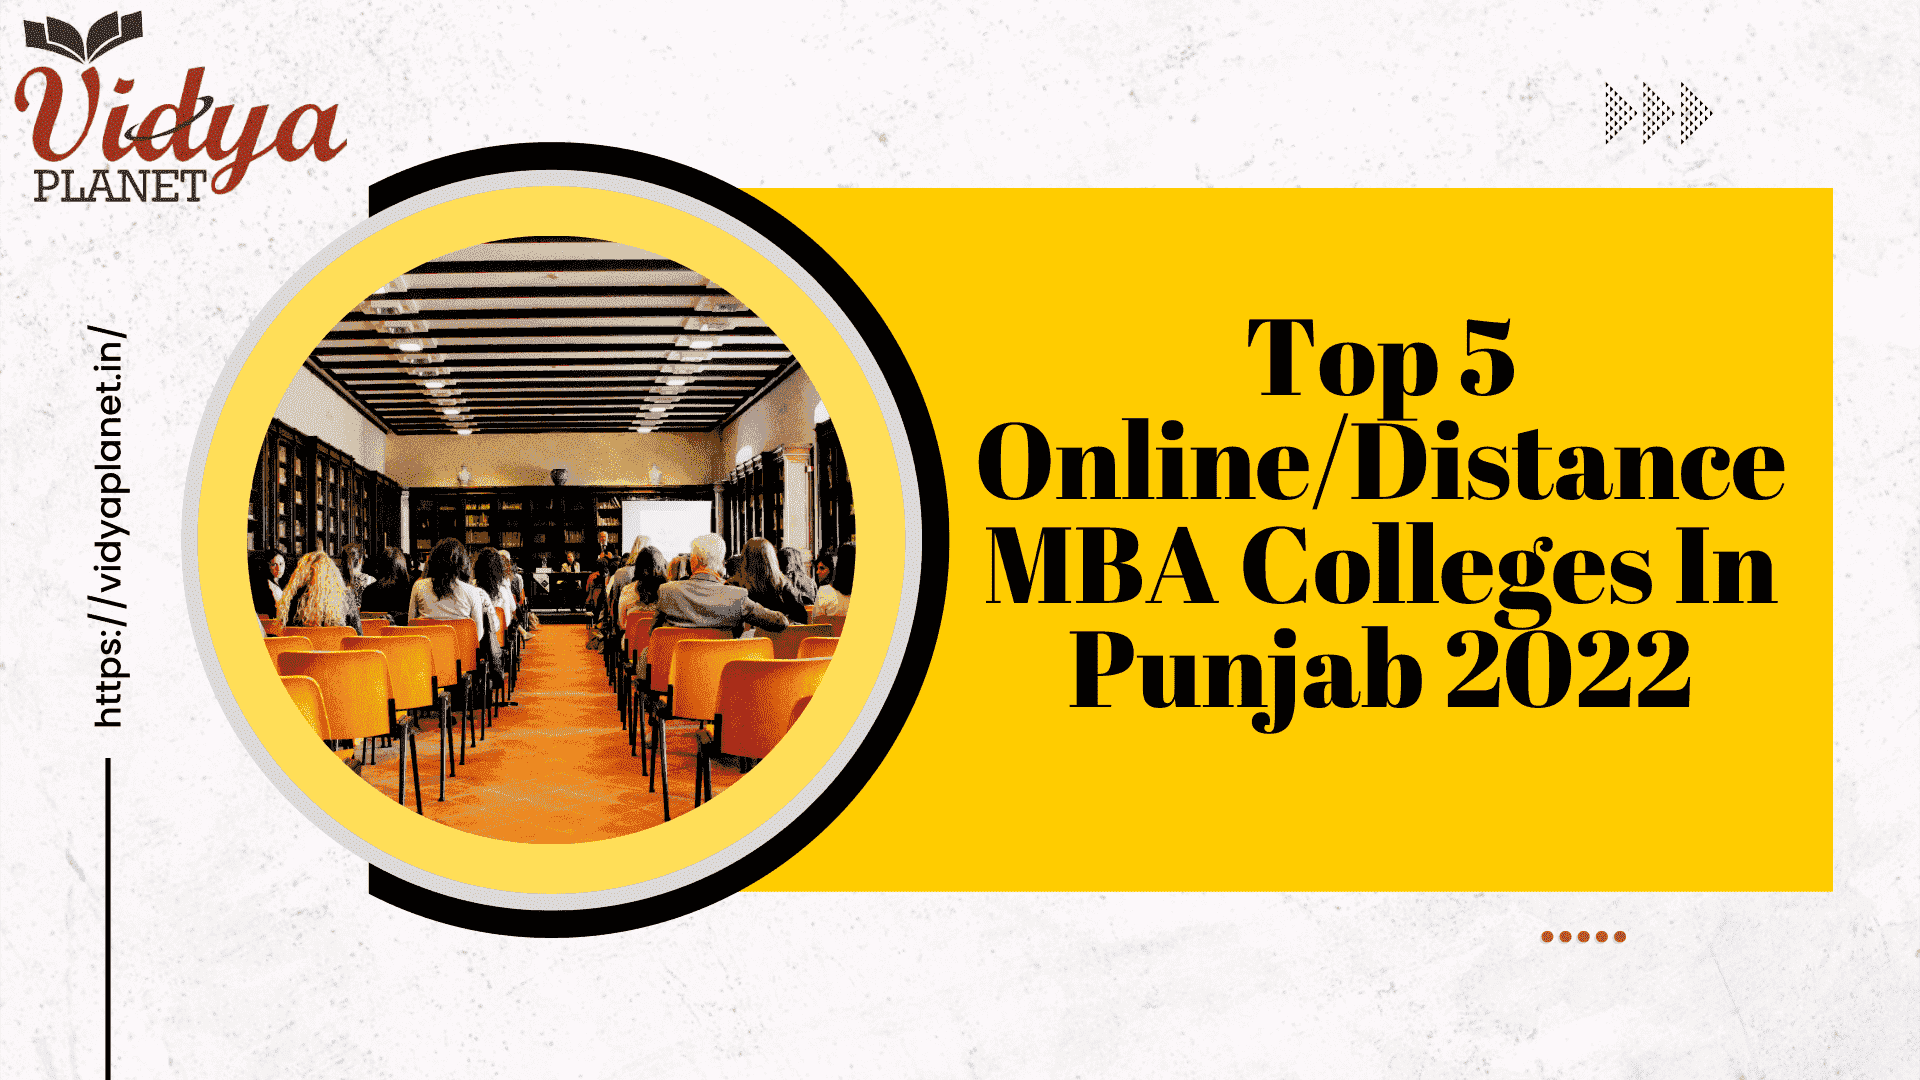 Top 5 Online/Distance MBA Colleges In Punjab 2022